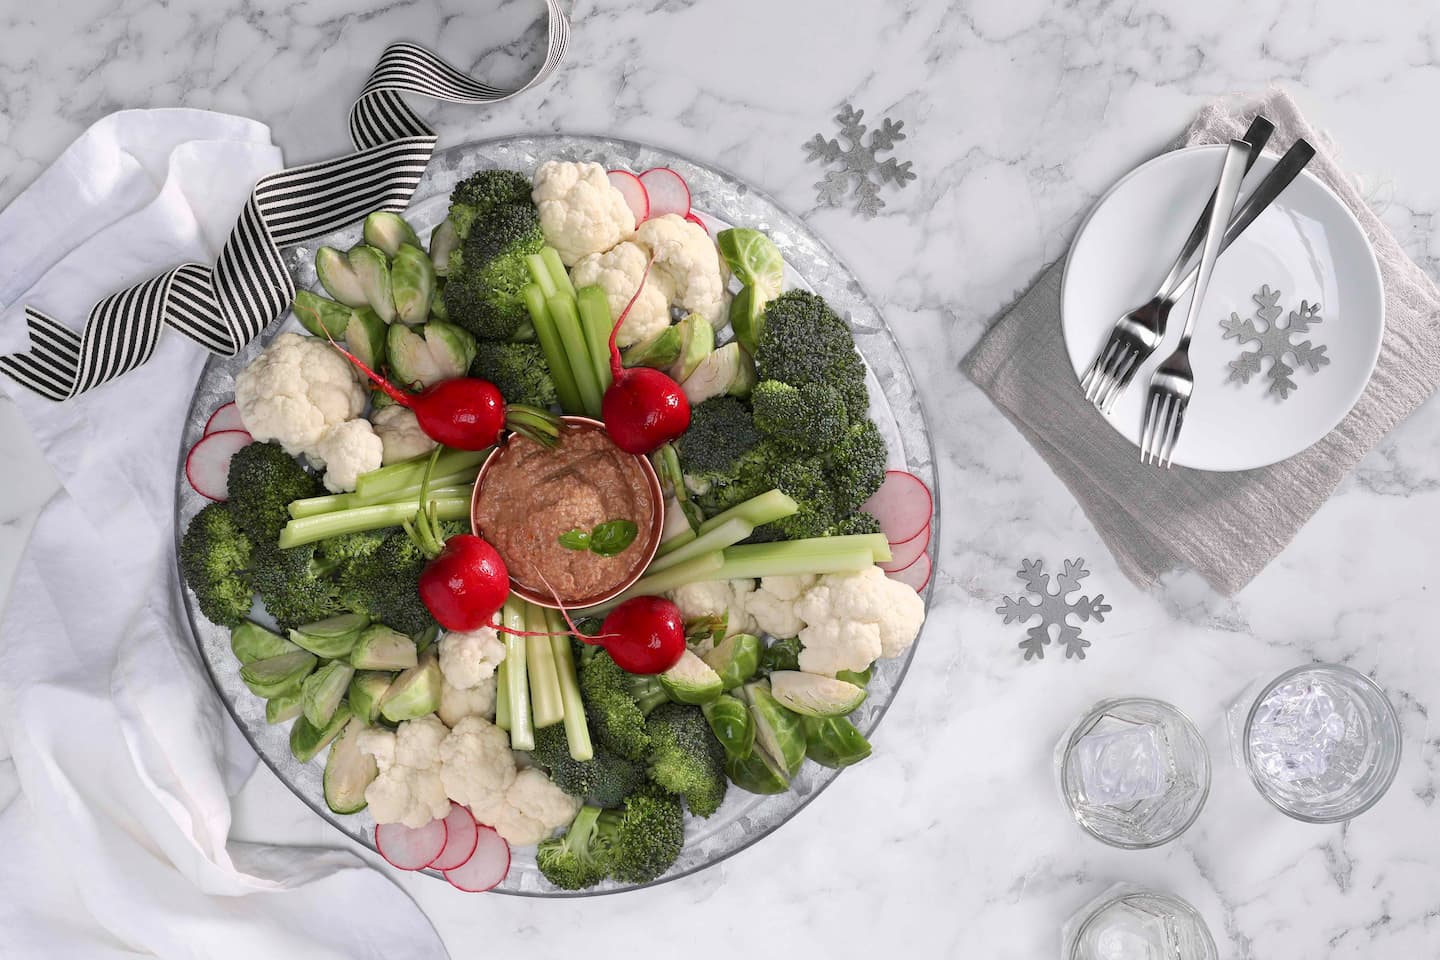 Vegetable Wreath with Sun-Dried Tomato Cashew Dip